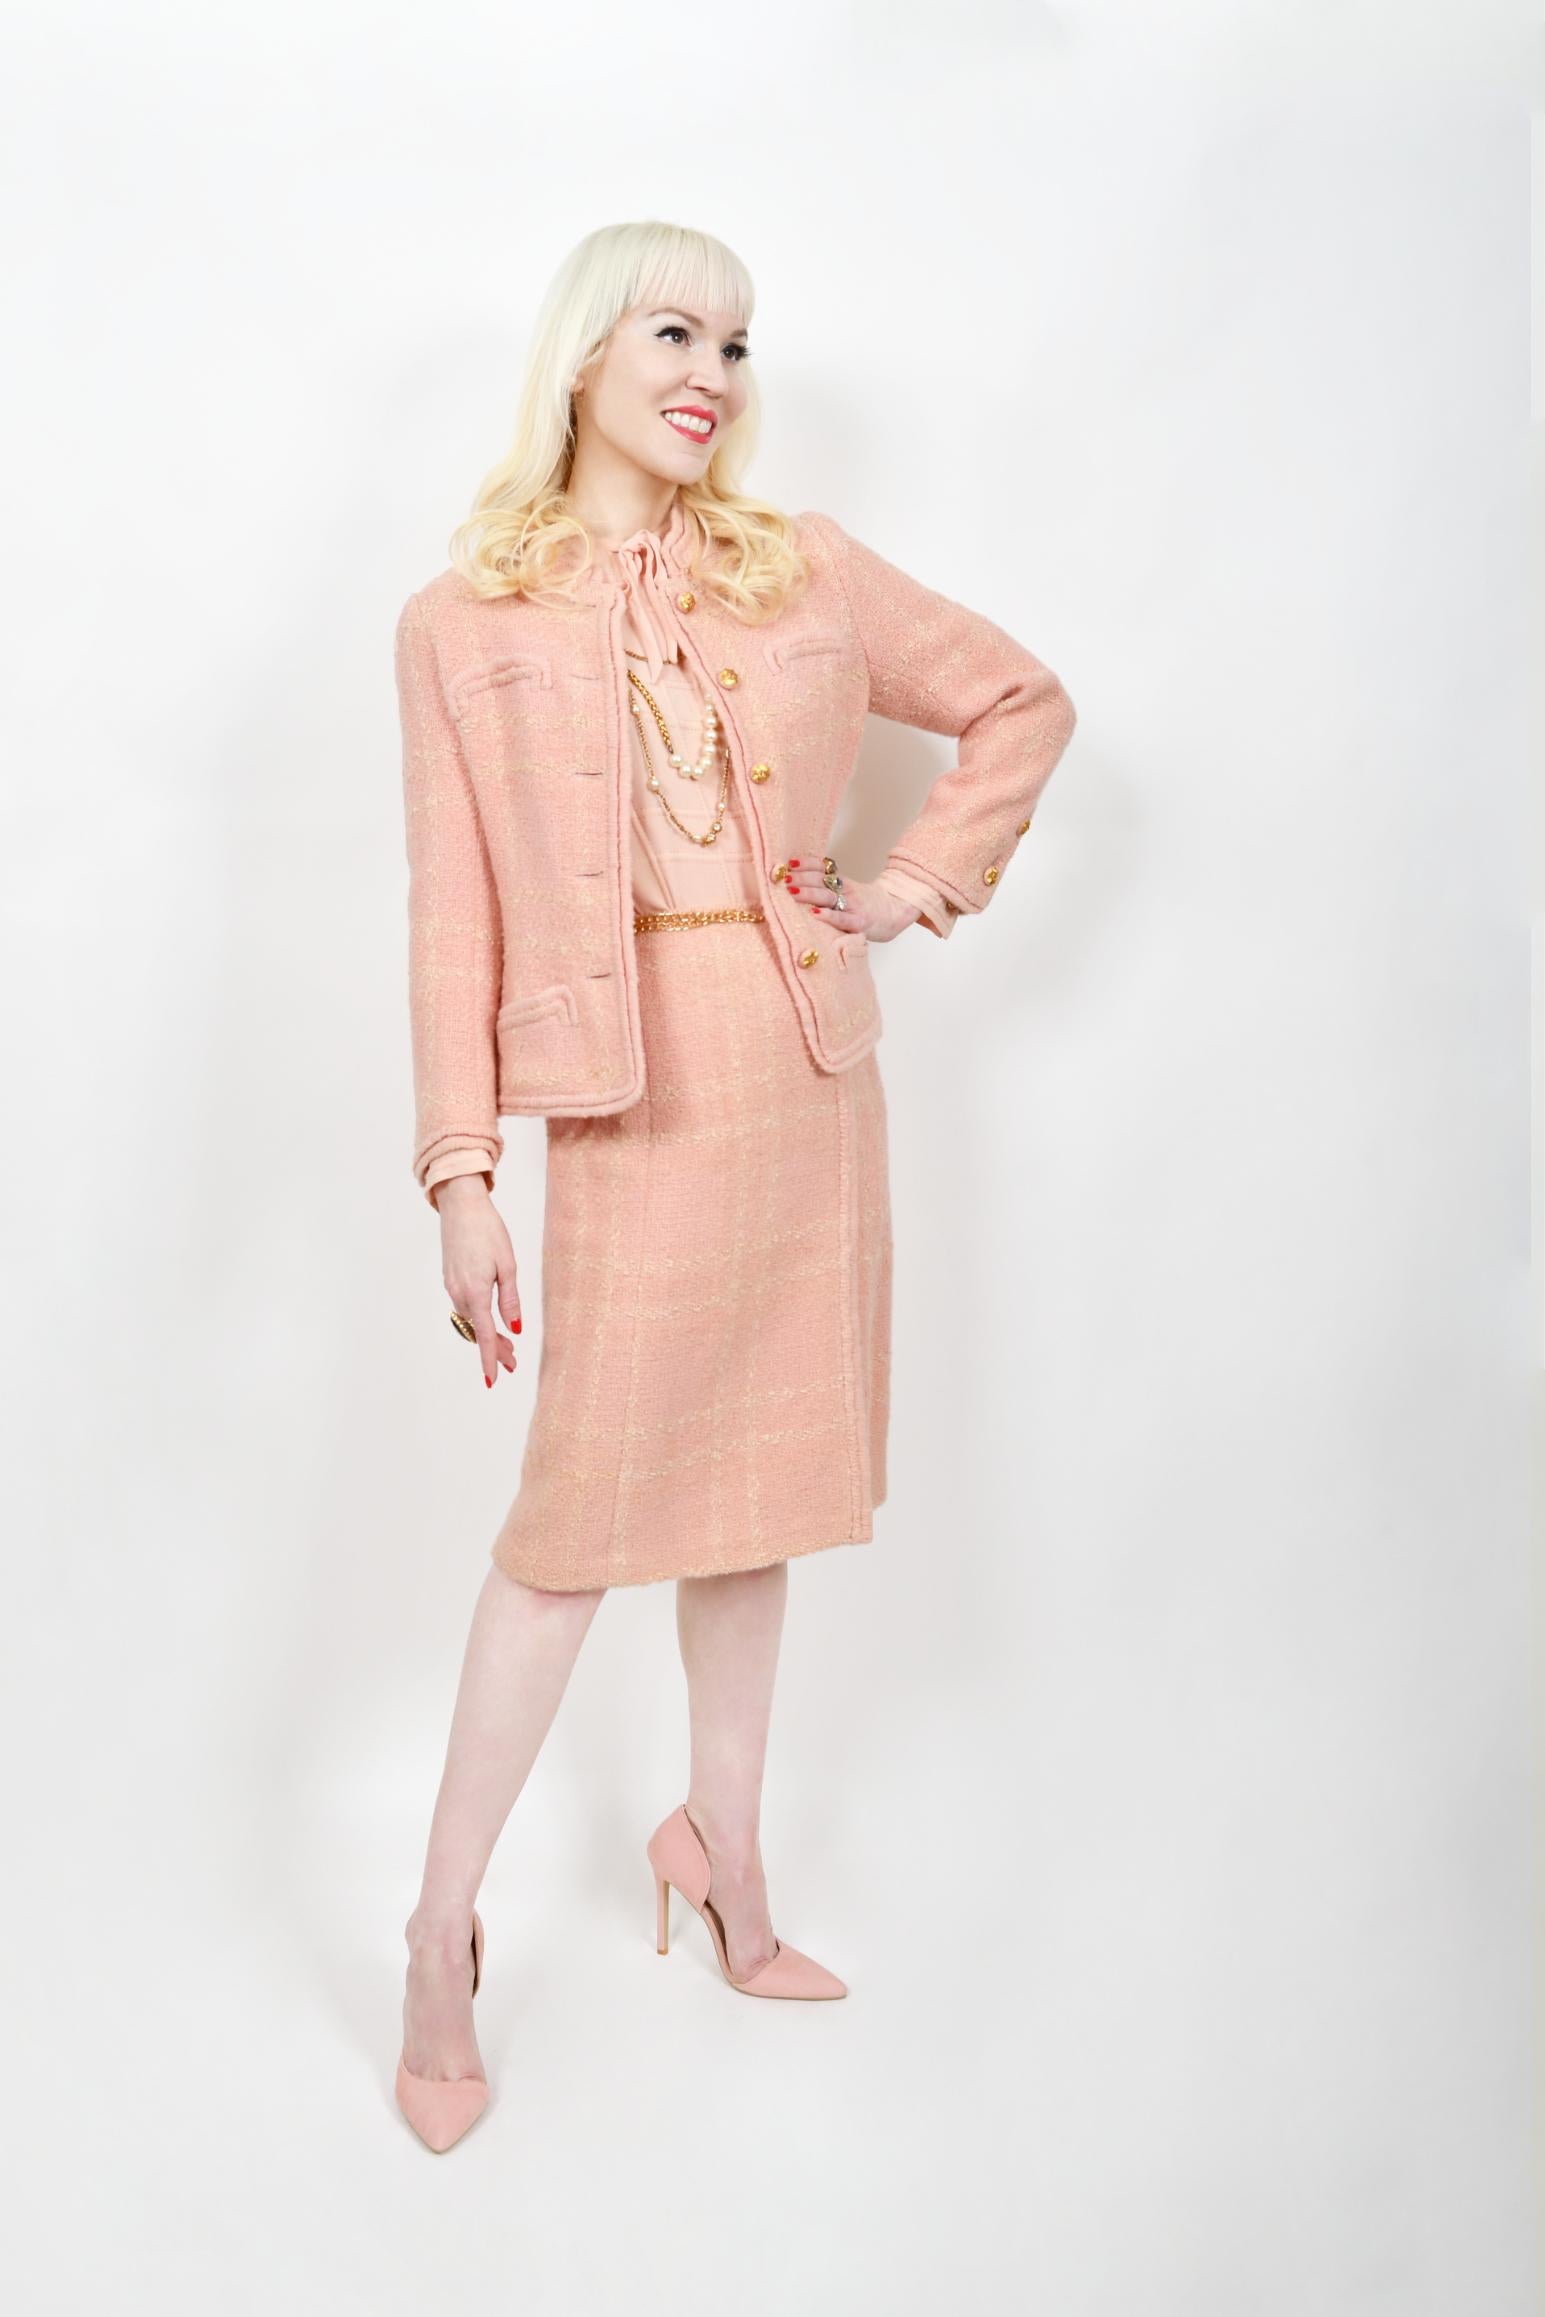 Vintage 1973 Chanel Haute Couture Documented Pink Wool Jacket Blouse Skirt Suit In Good Condition For Sale In Beverly Hills, CA